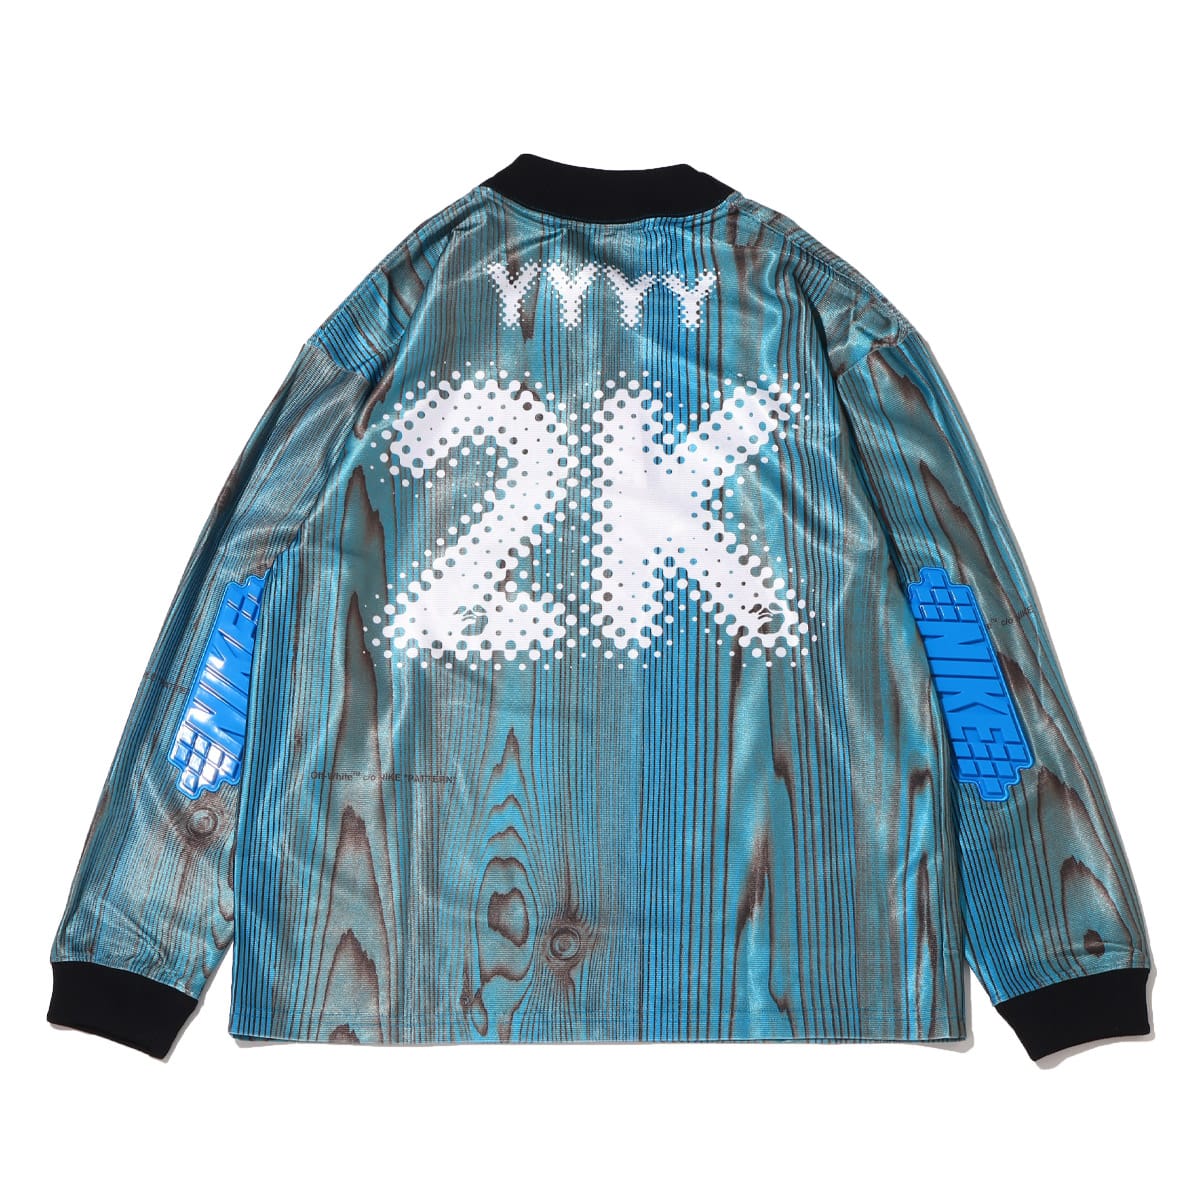 Nike x Off-White Jersey 001メンズジャージ